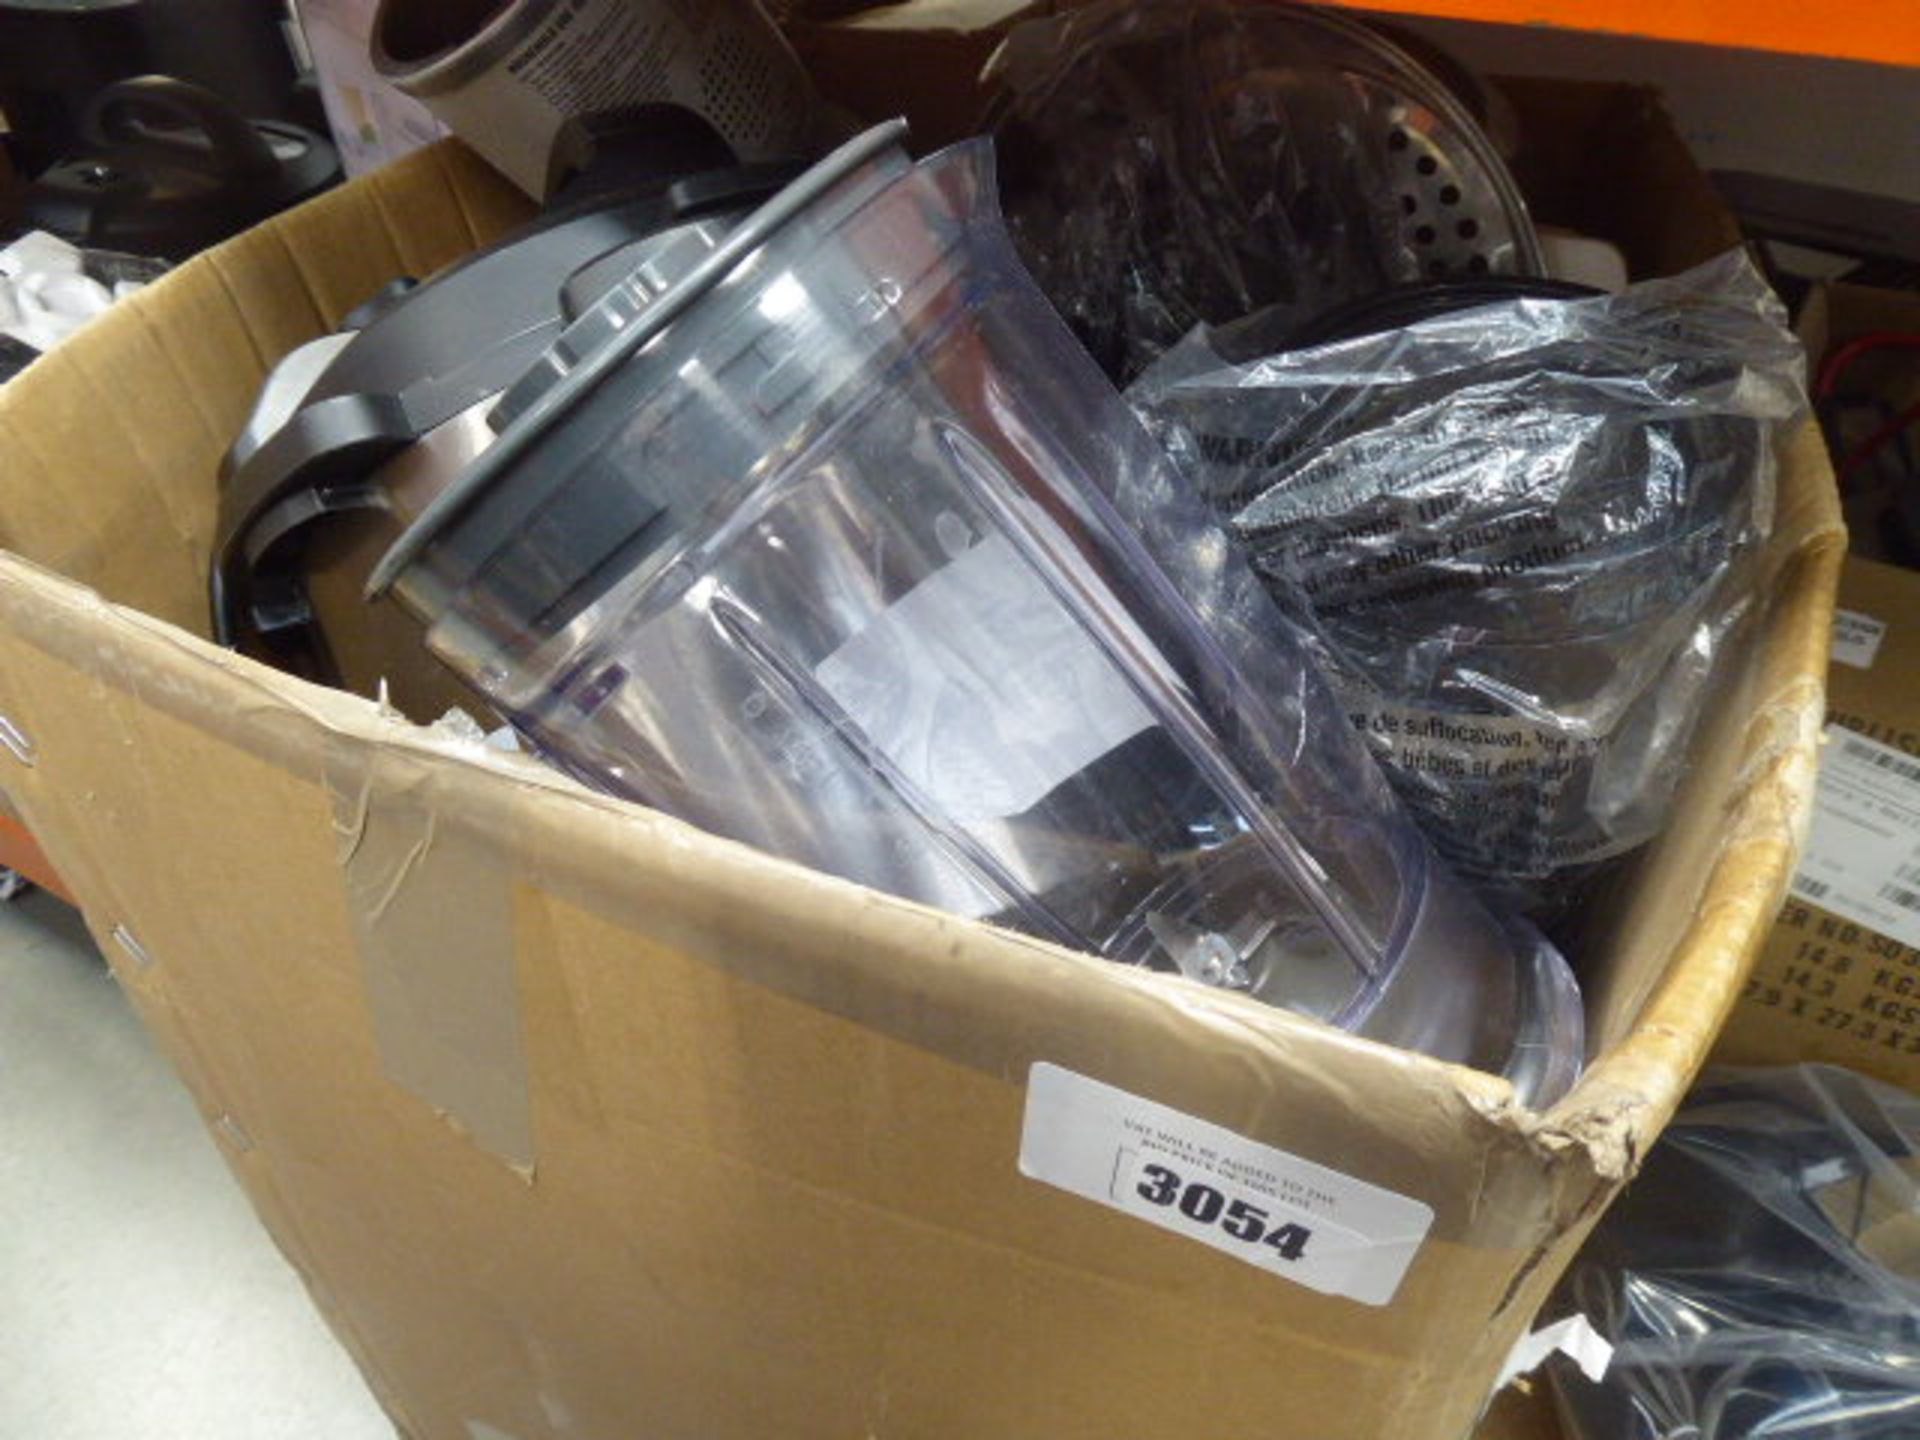 Large box of mixed kitchen equipment including blenders, pressure cookers etc